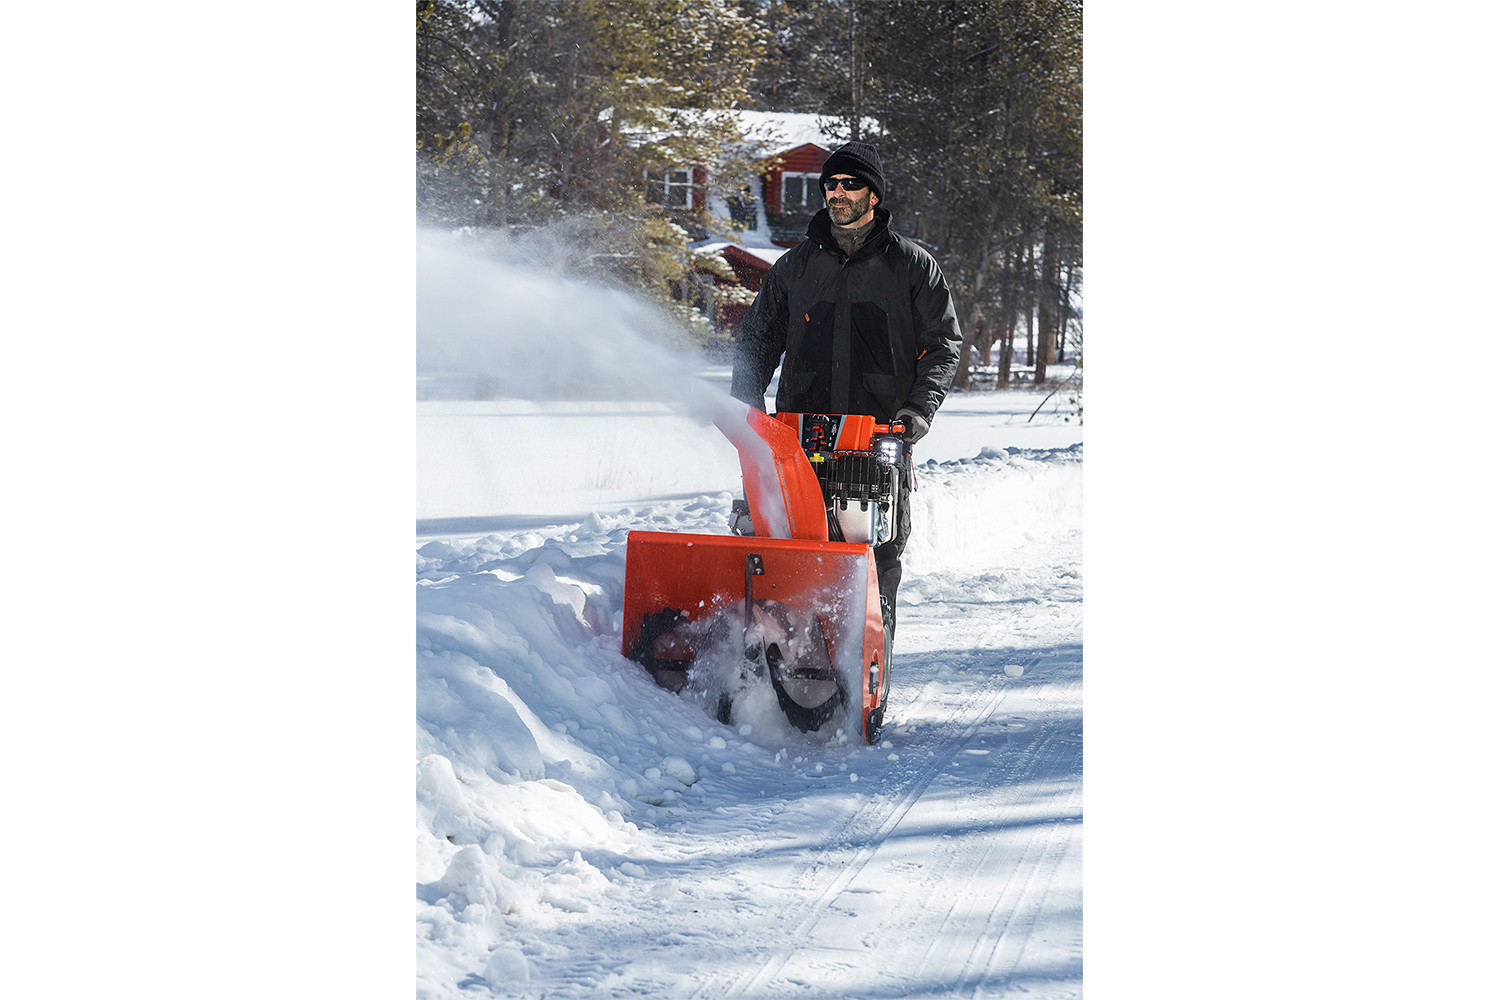 SIMPLICITY SIGNATURE PRO SERIES DUAL-STAGE SNOW BLOWER P2132<br/>*Model shown in image may vary.